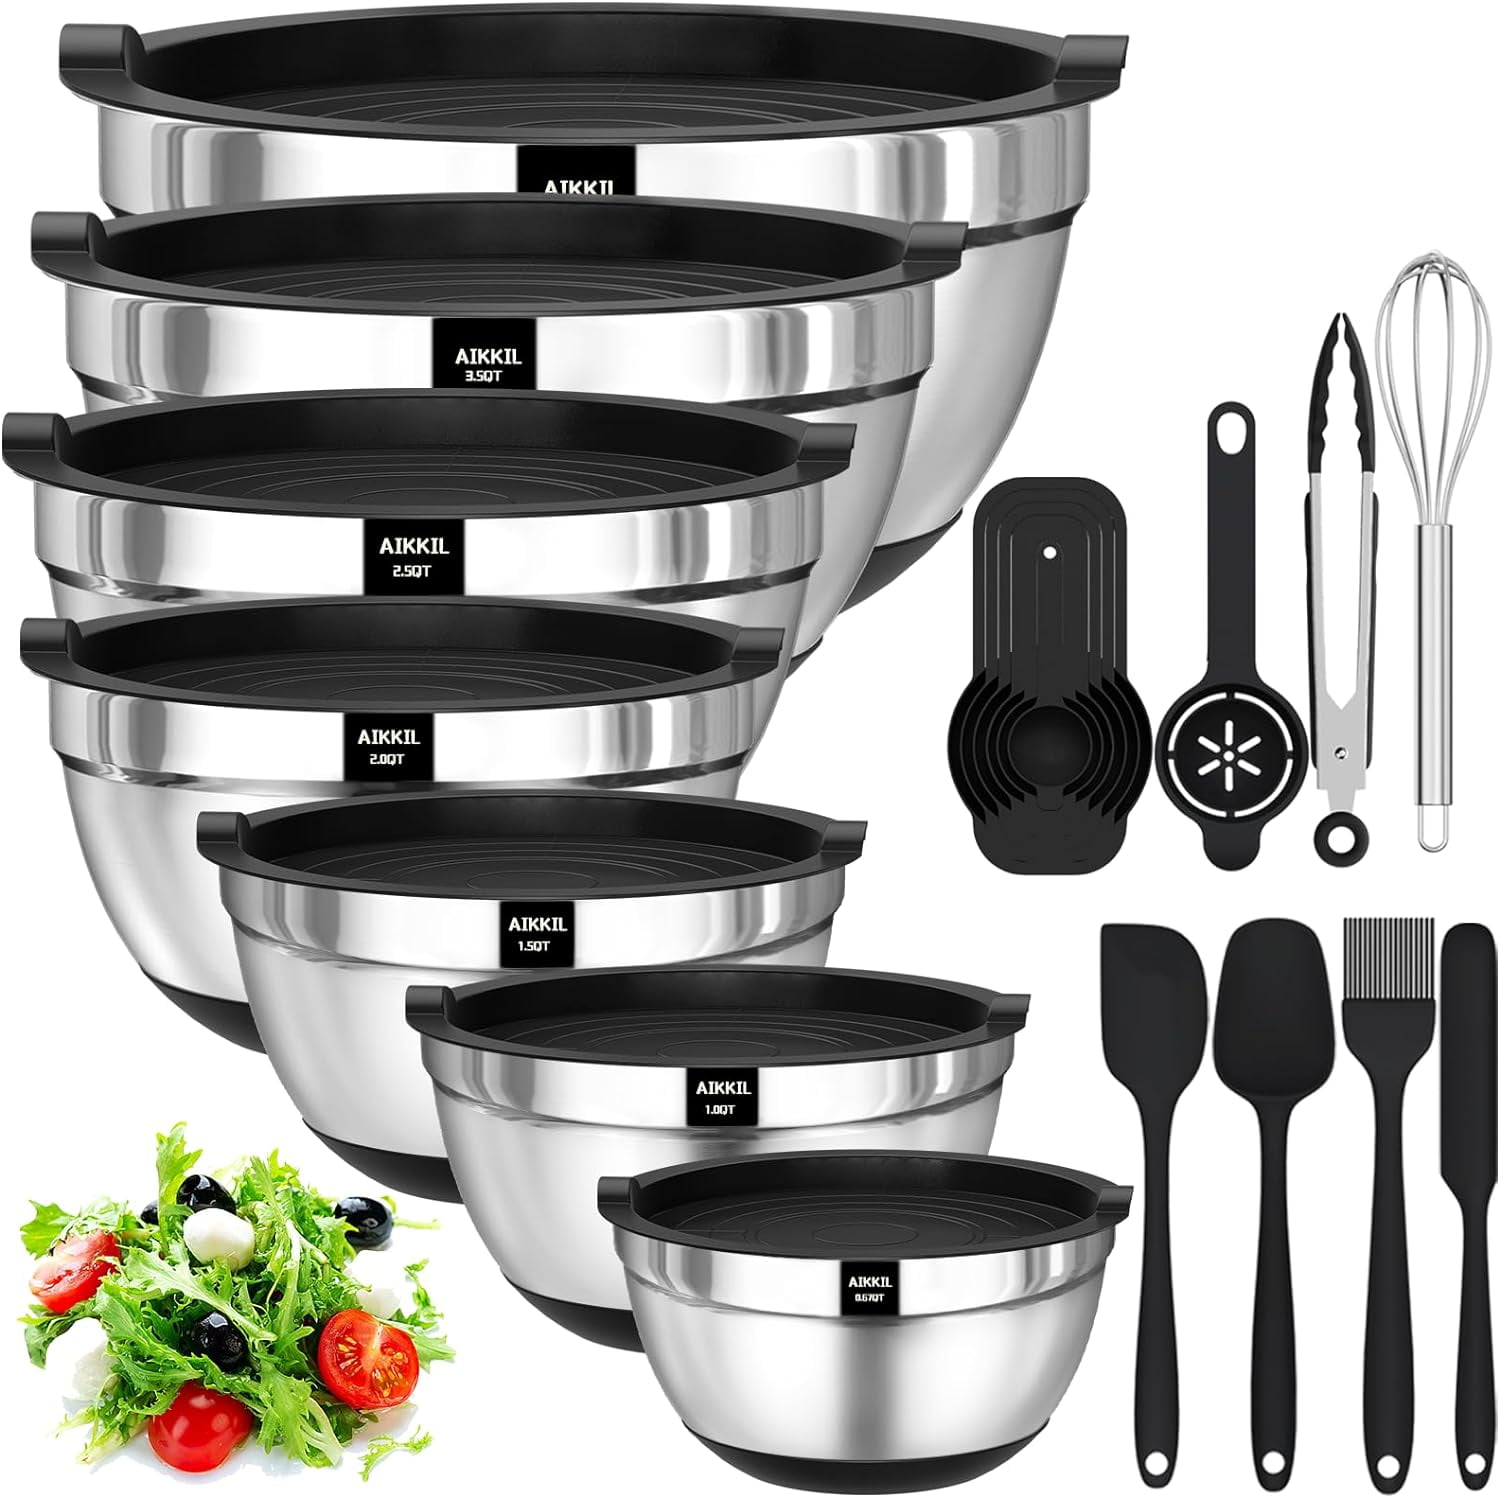 AIKKIL Mixing Bowls with Airtight Lids, 20 Piece Stainless Steel Metal Nesting Bowls, Non-Slip Silicone Bottom, Size 7, 3.5, 2.5, 2.0,1.5, 1,0.67QT